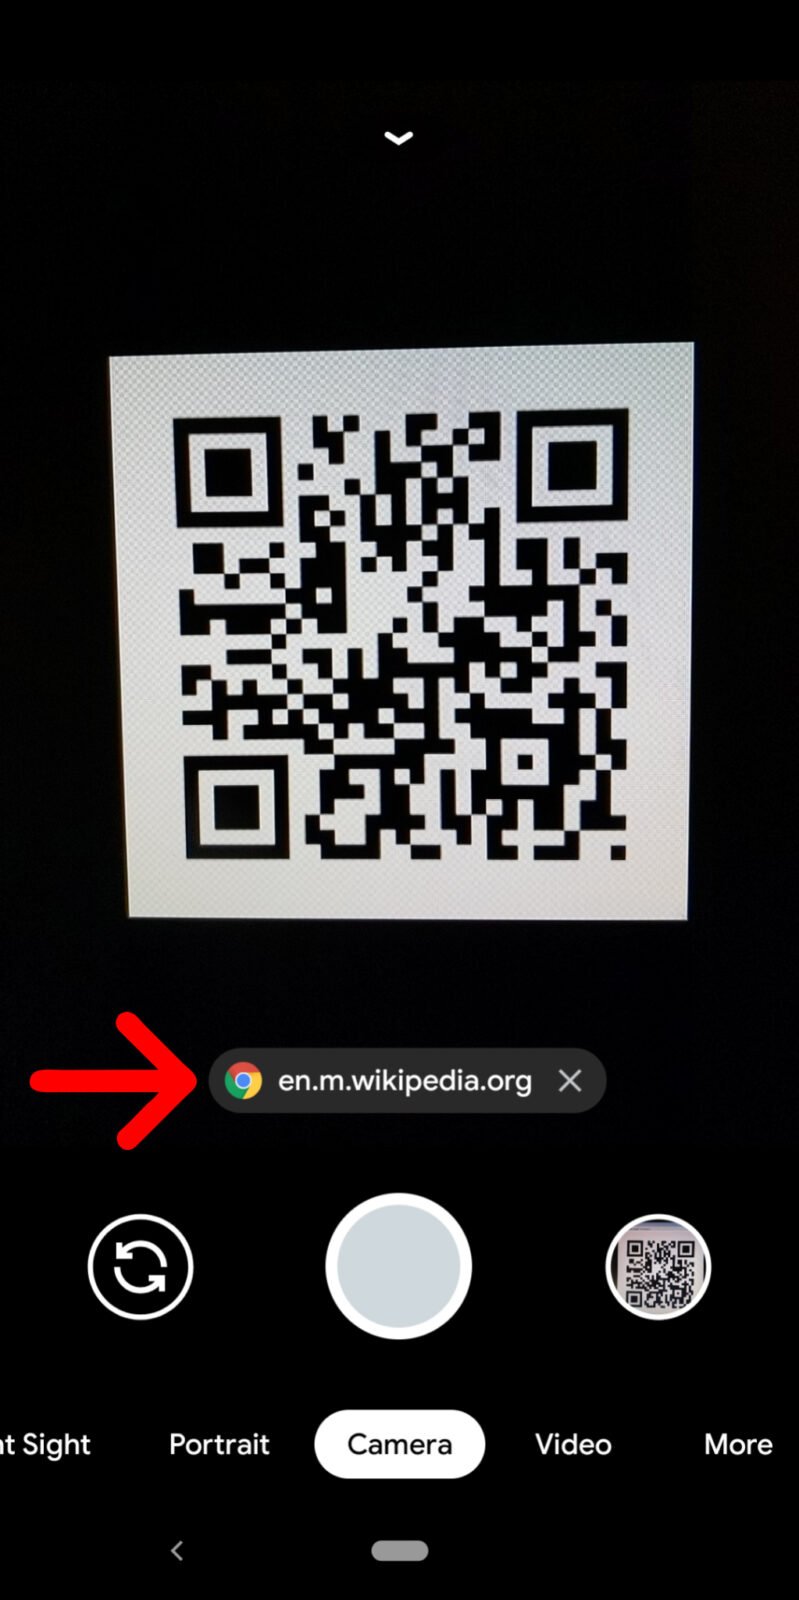 scan barcode on android